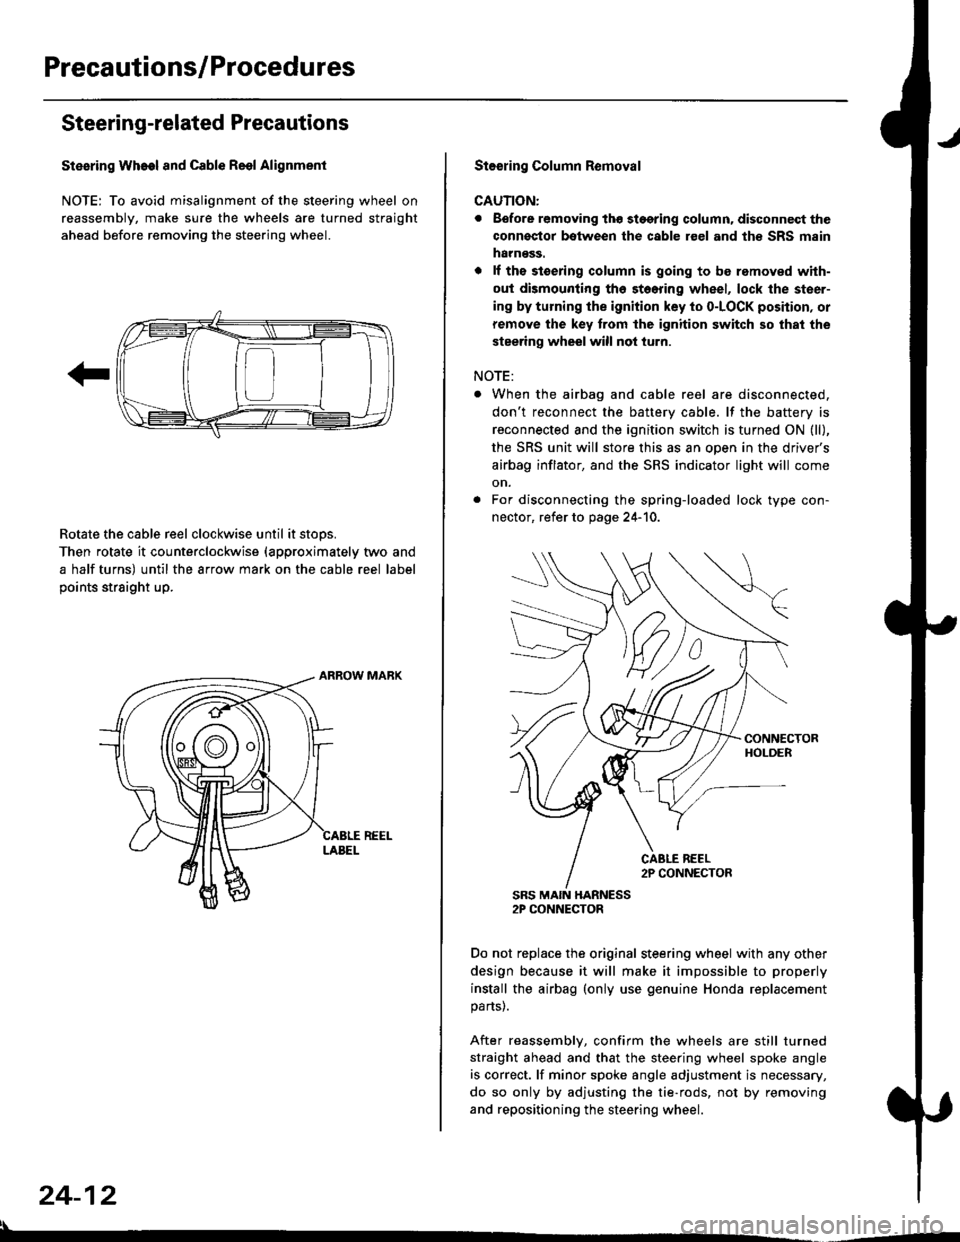 HONDA CIVIC 1996 6.G Owners Guide Precautions/Procedu res
Steering-related Precautions
Stesring Wheel and Cable Reol Alignment
NOTE: To avoid misalignment of the steering wheel on
reassembly, make sure the wheels are turned straight
a